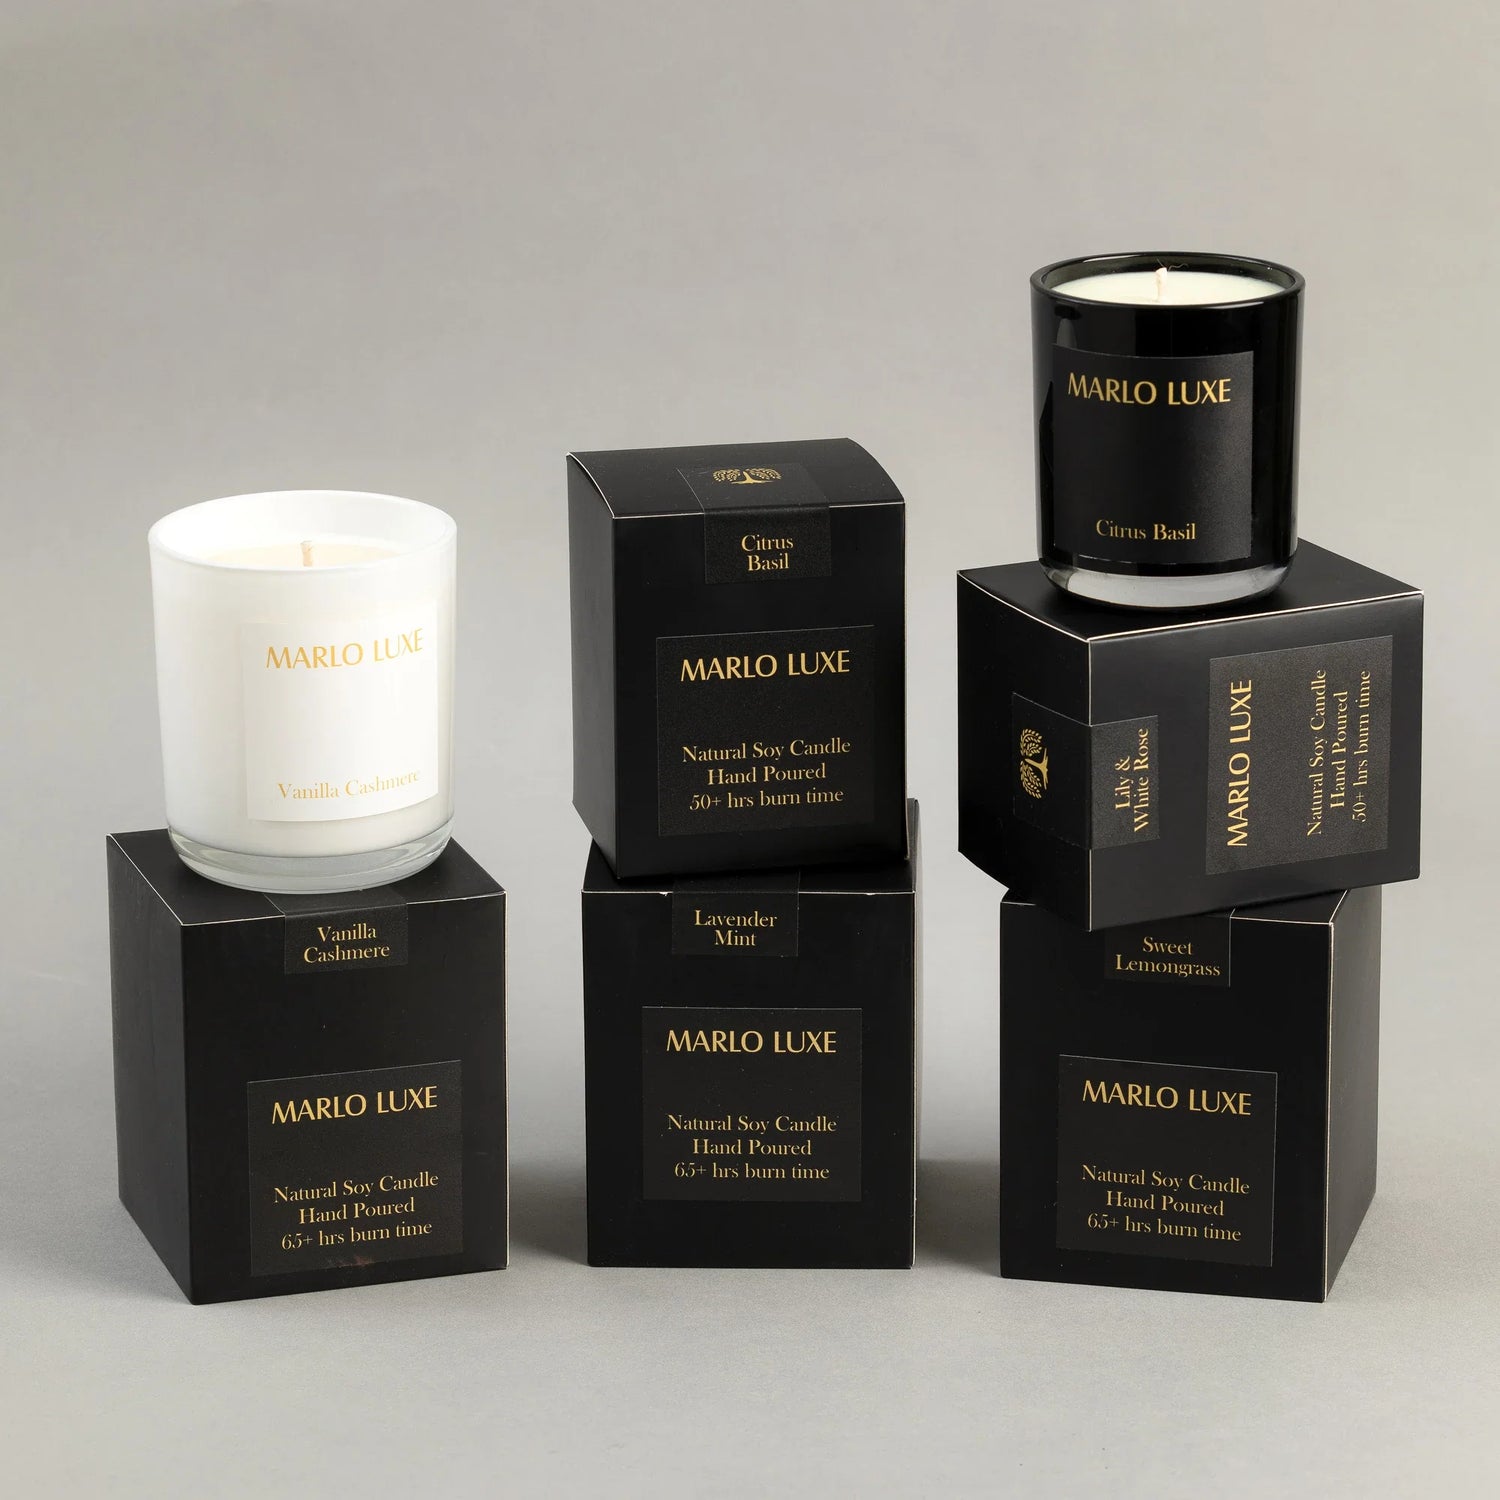 A selection of candles in white glass and packaged in a black bow with gold font.